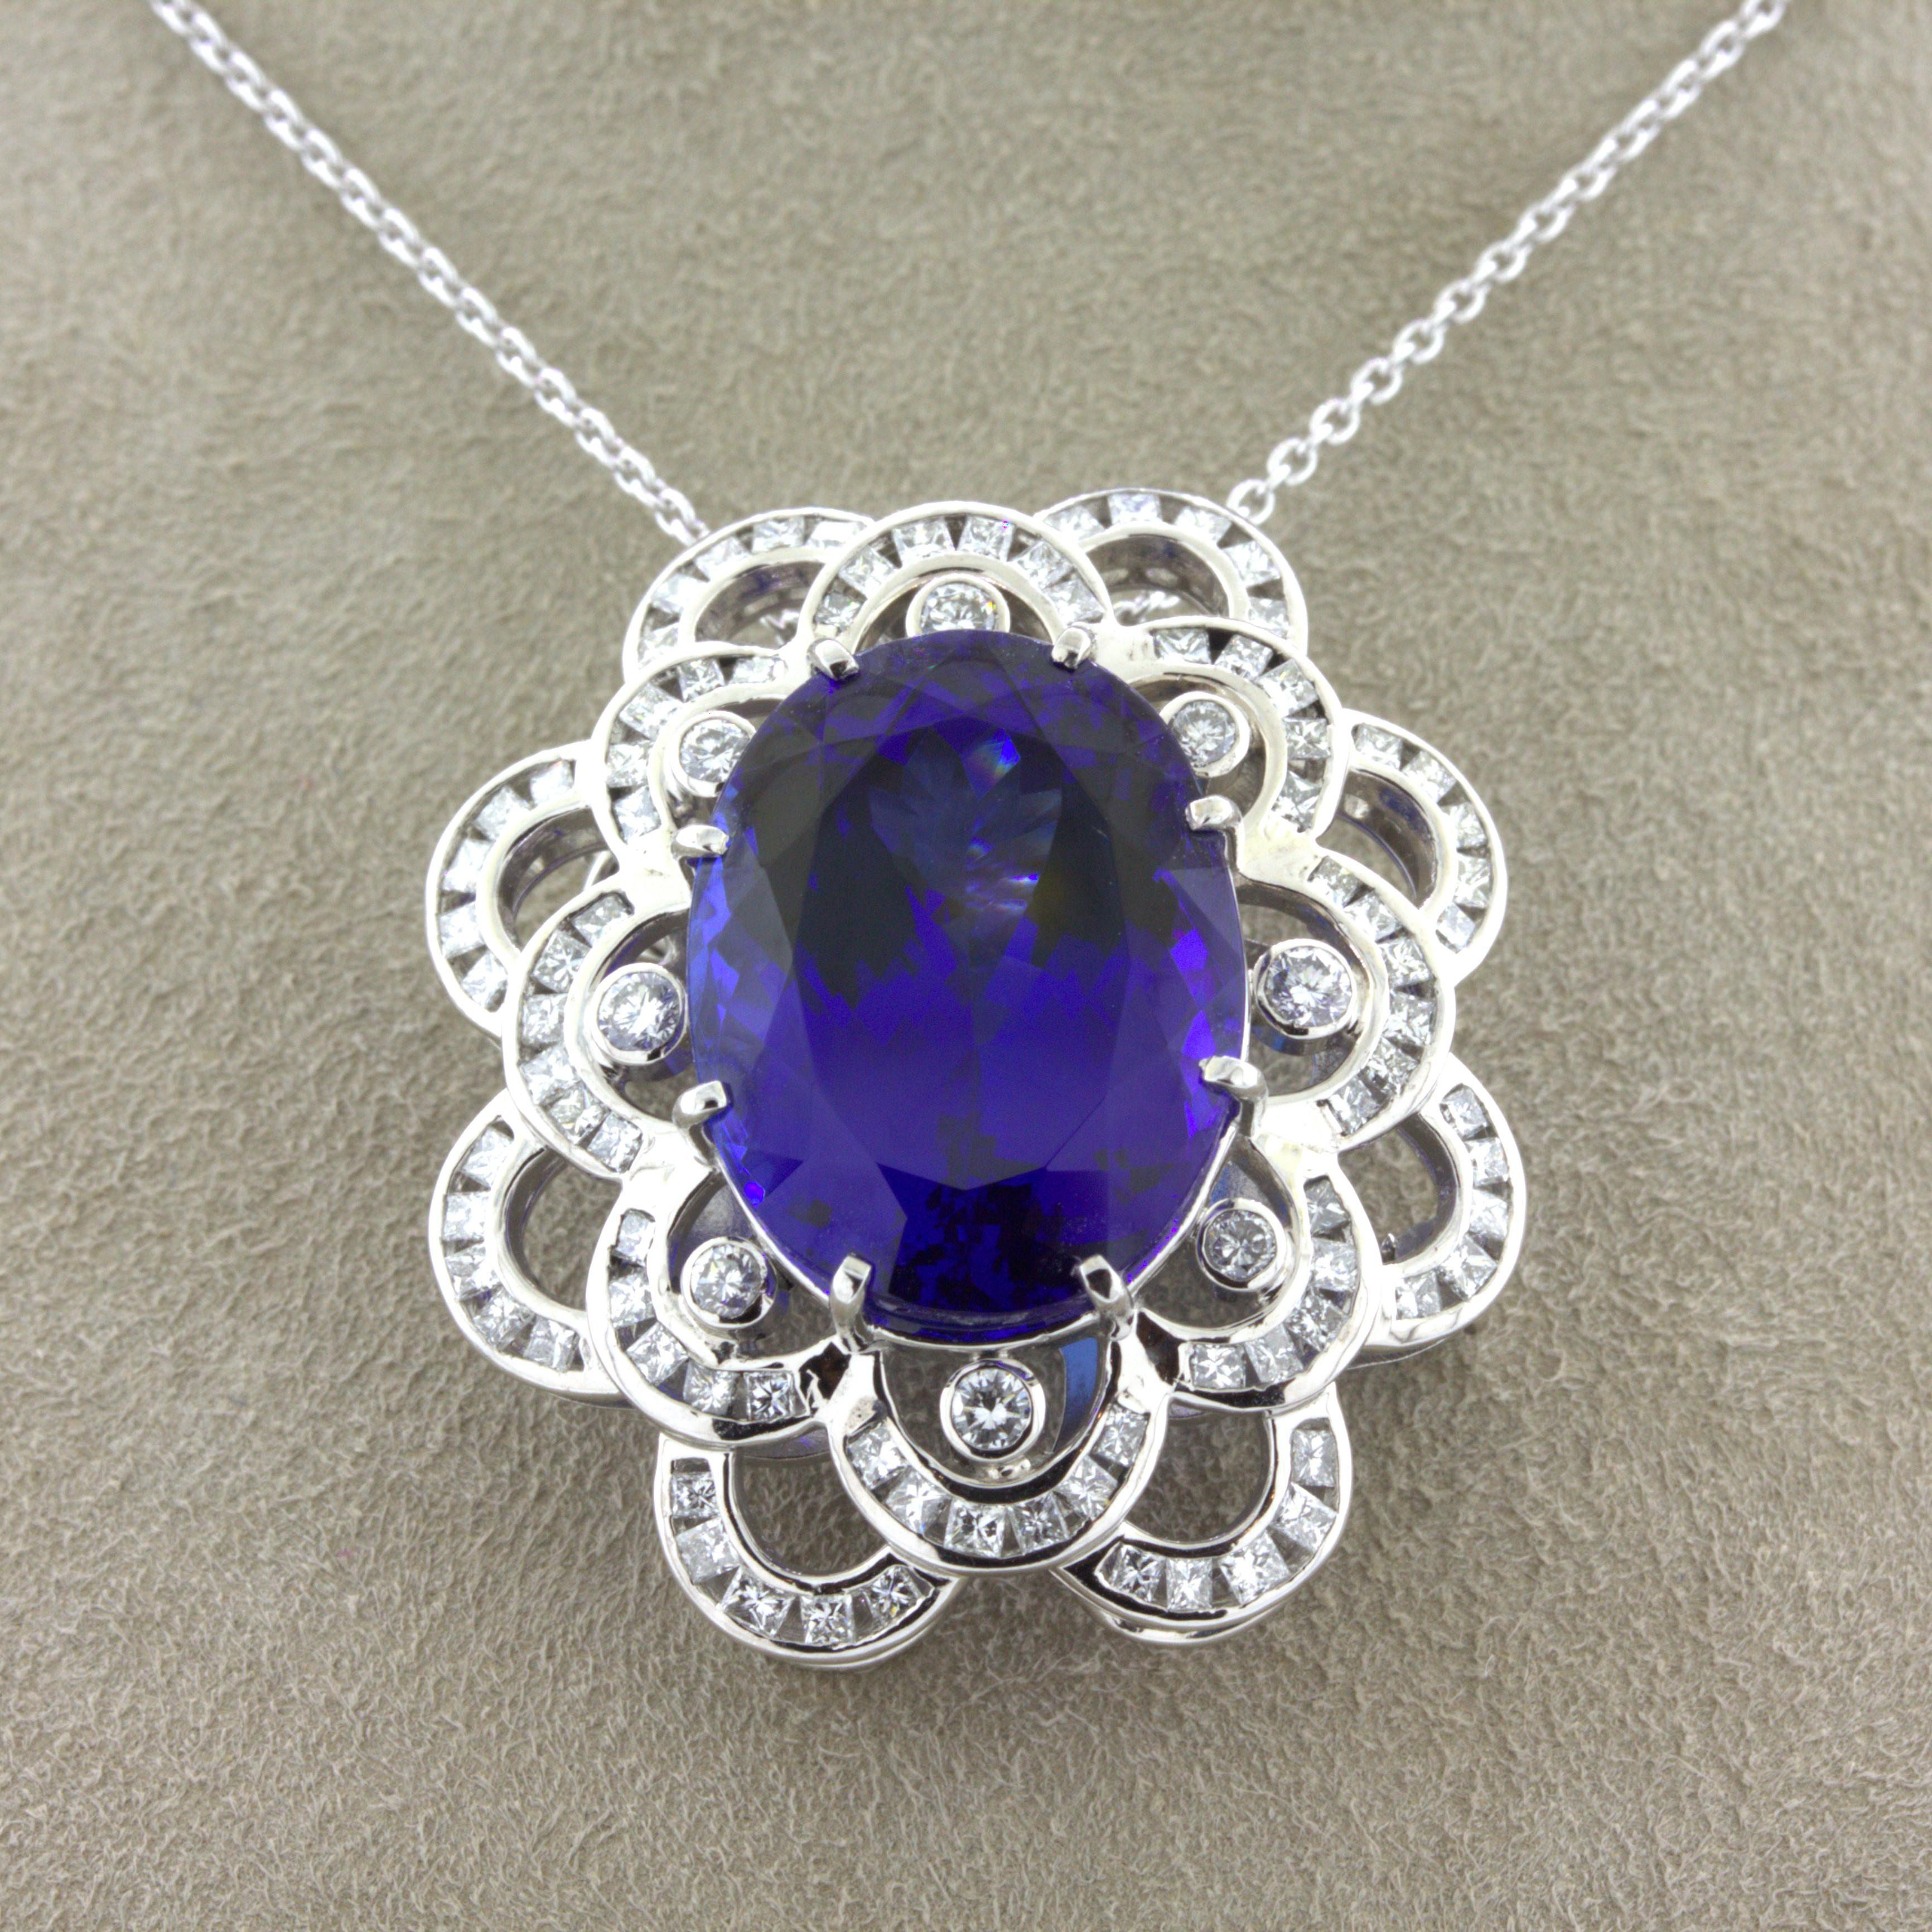 A large 15.12 carat gemmy tanzanite takes center stage of this platinum made pendant which can also be worn as a brooch. It has a rich jelly purplish-blue color that often gets misidentified as sapphire due to its rich dominantly blue color. The